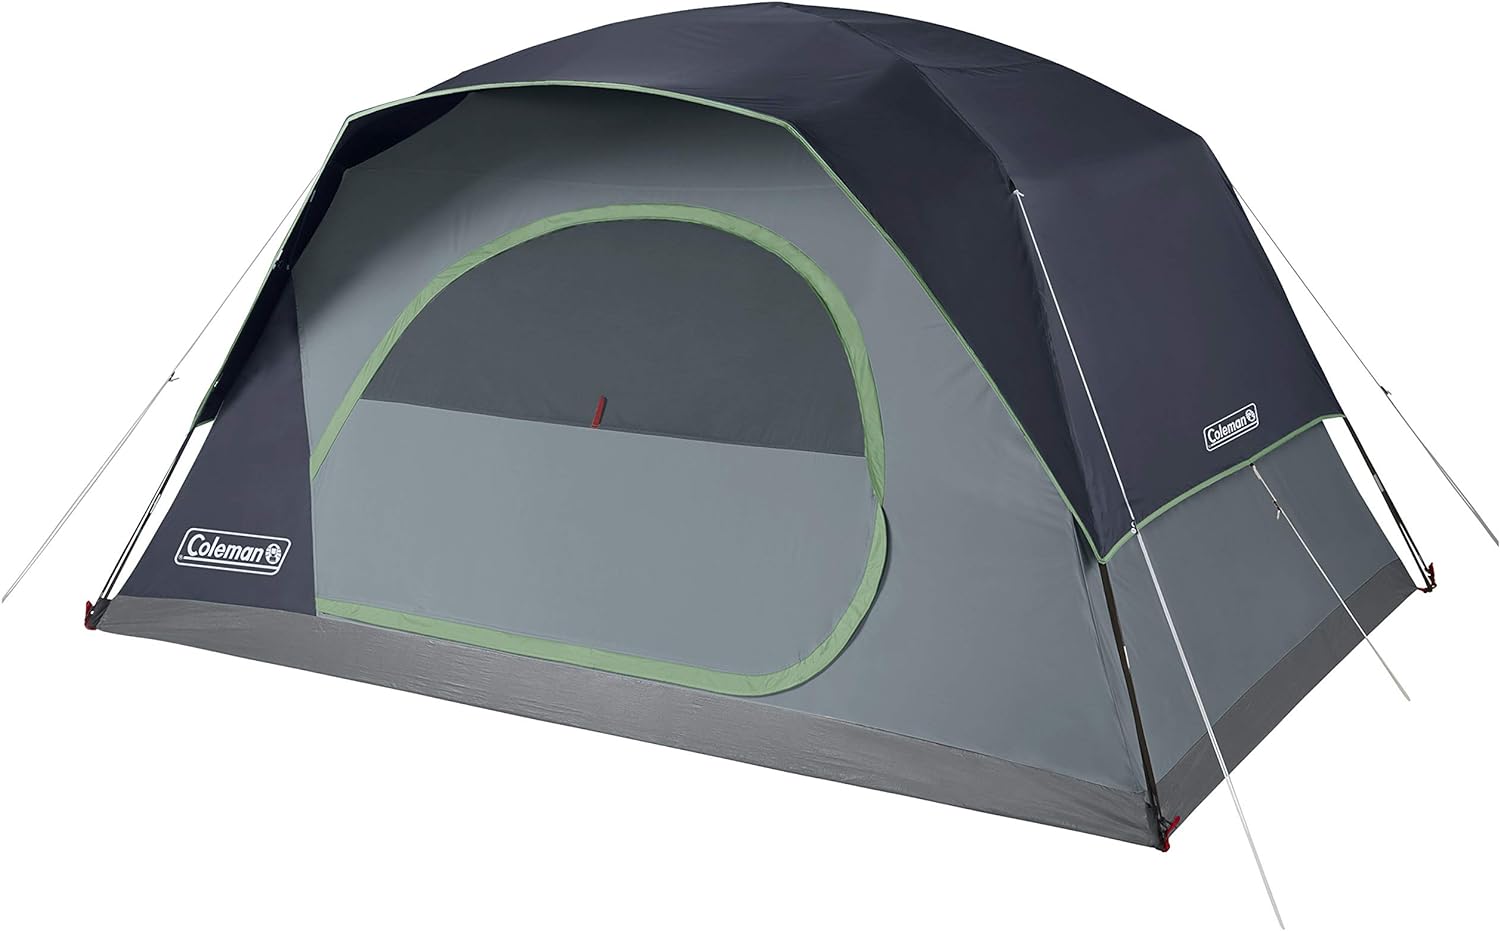 Coleman Skydome 8 Person Tent - $92.49